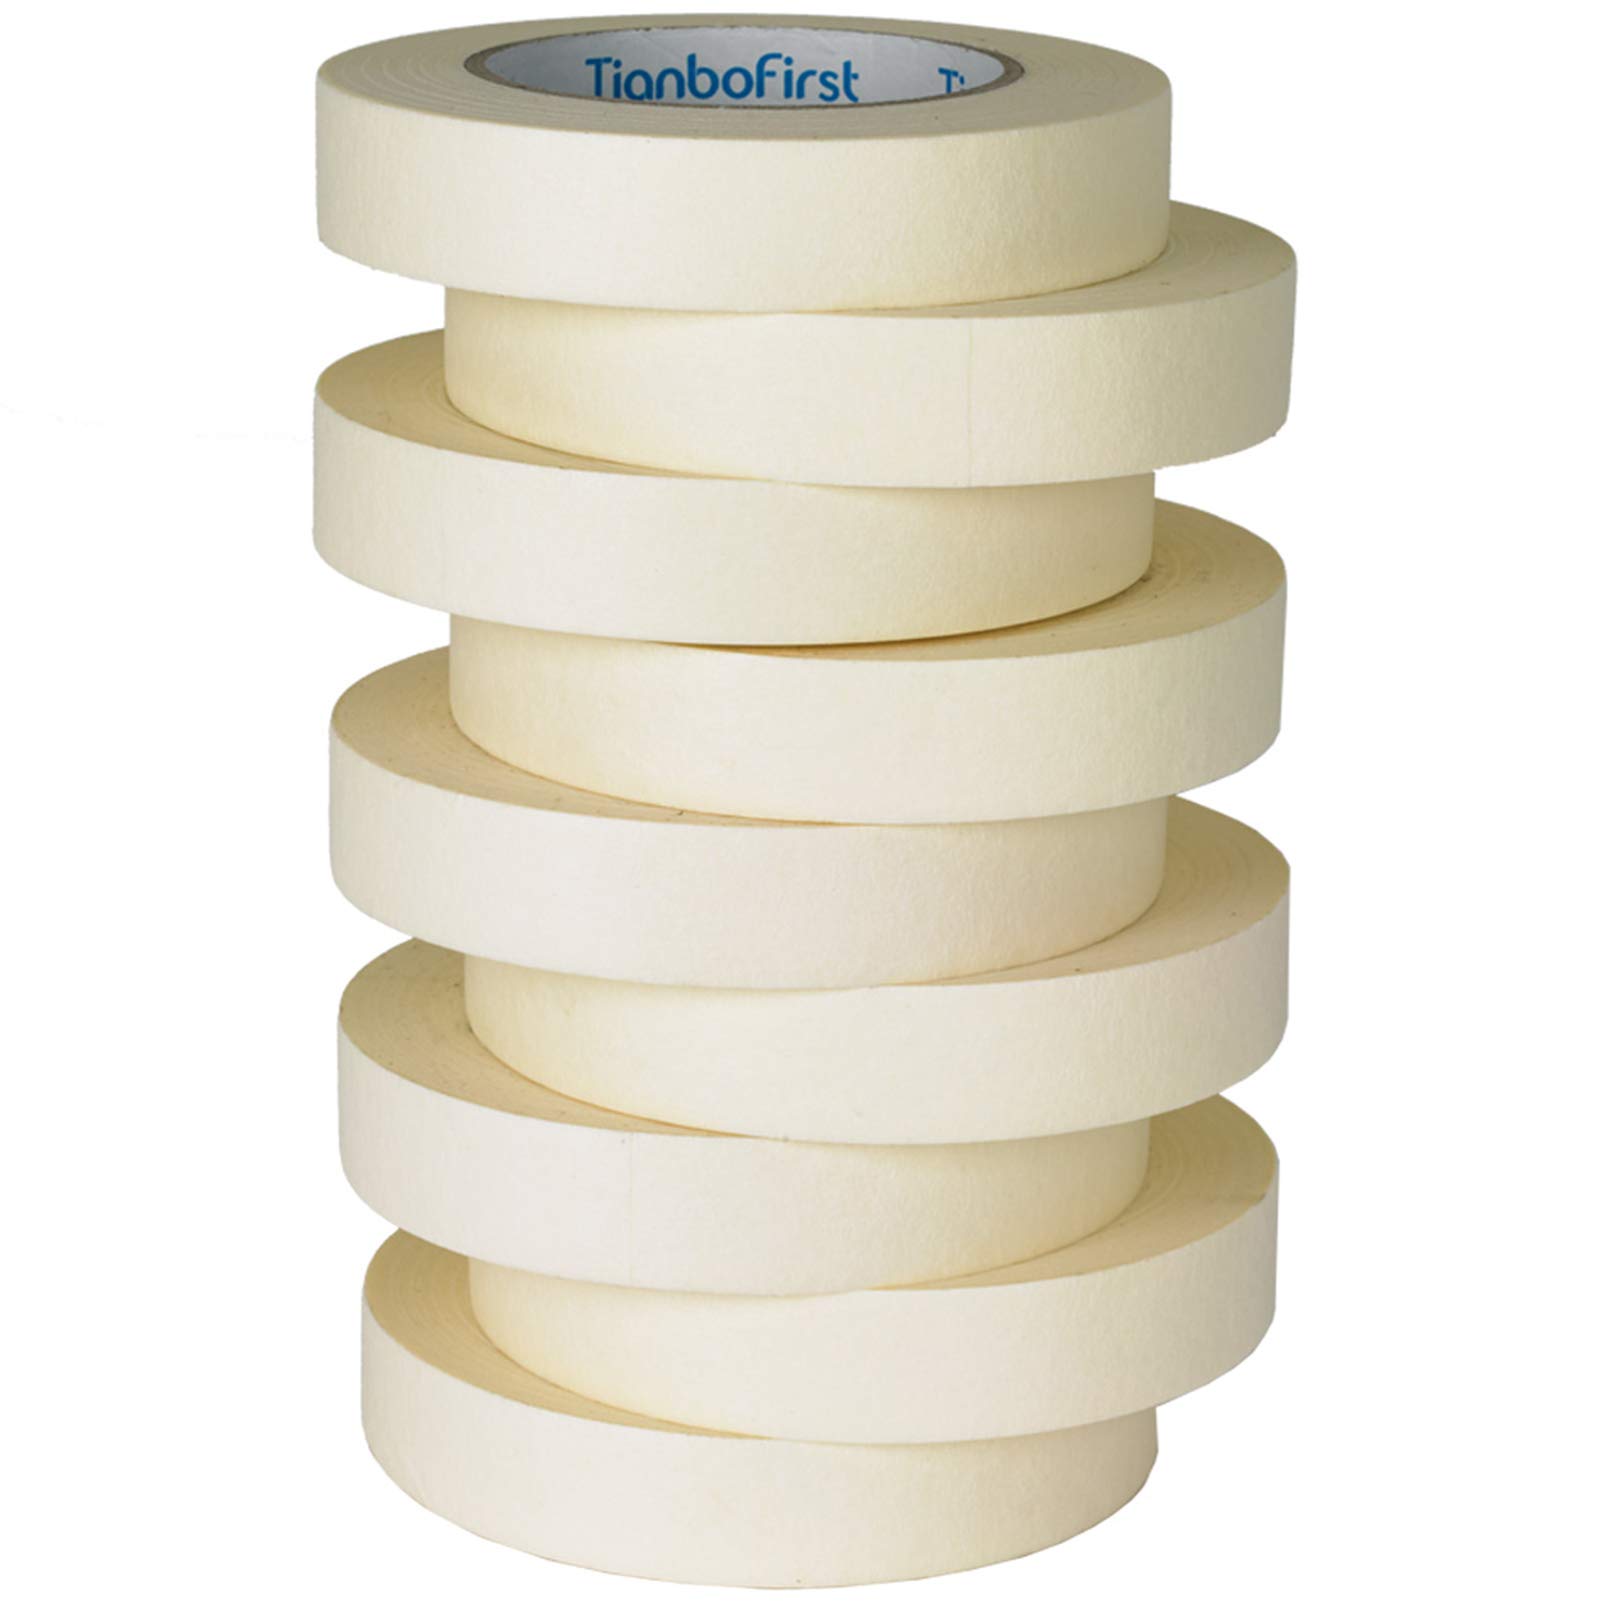 General Purpose Masking Tape for Home and Office 0.94-Inch x 60